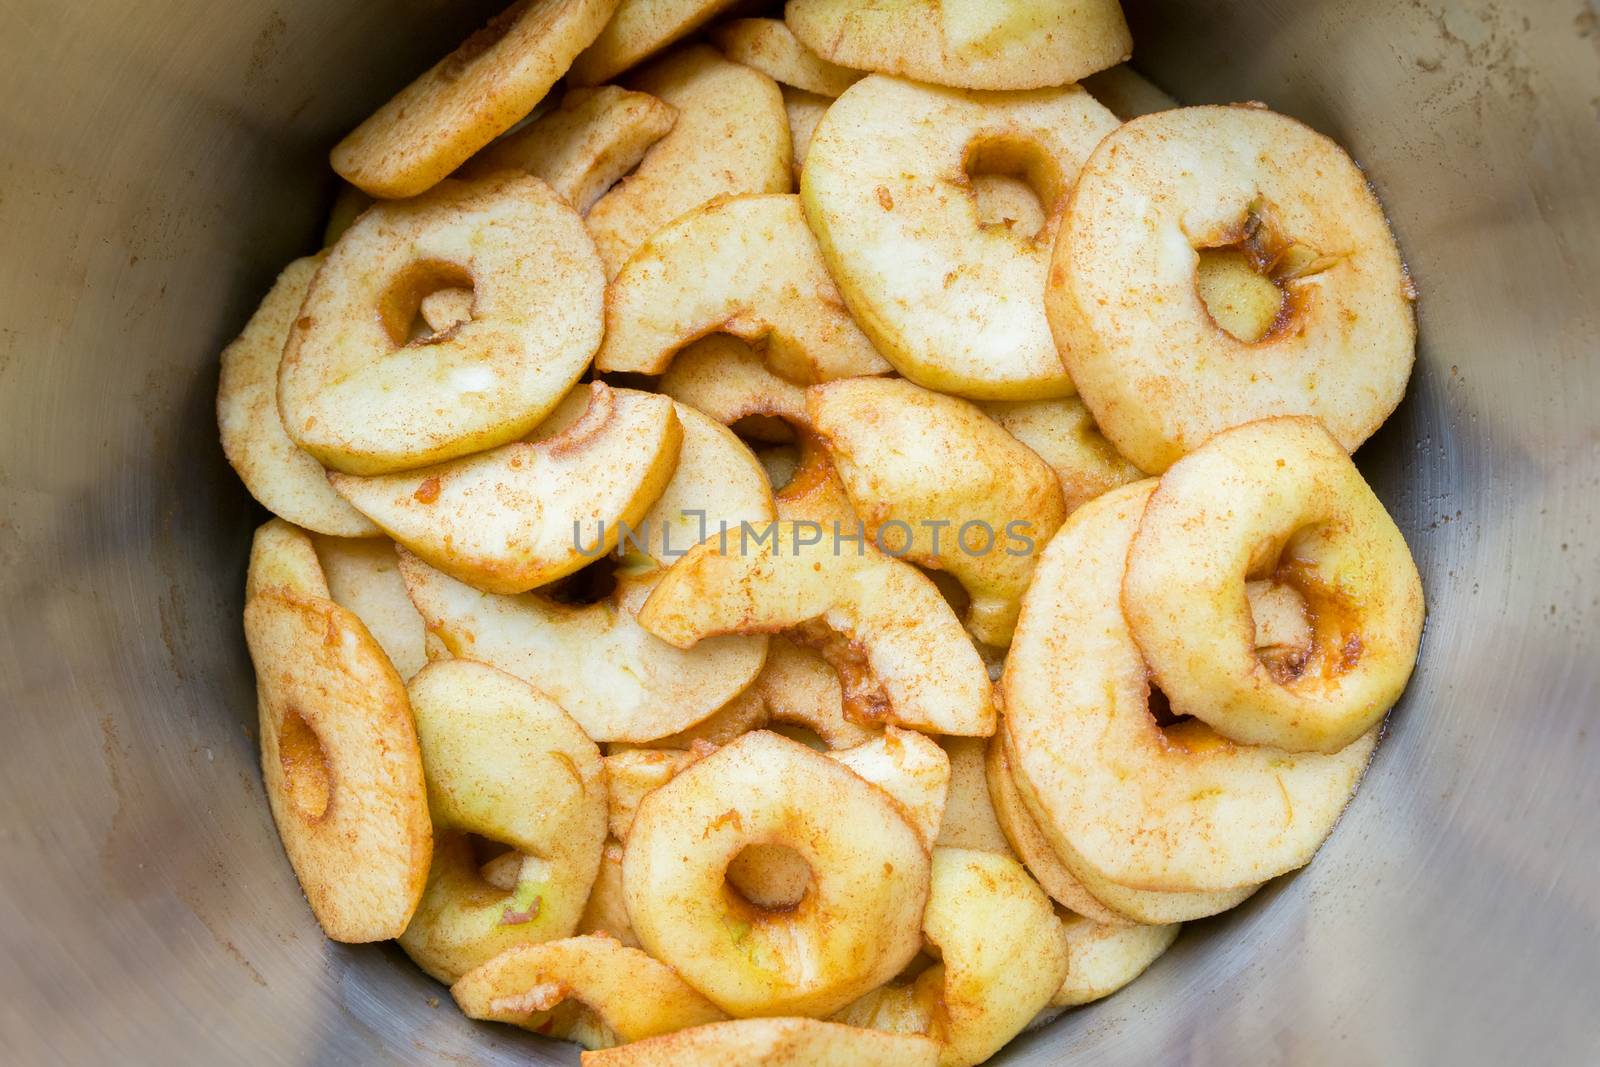 Many apple slices in metal pan by BenSchonewille